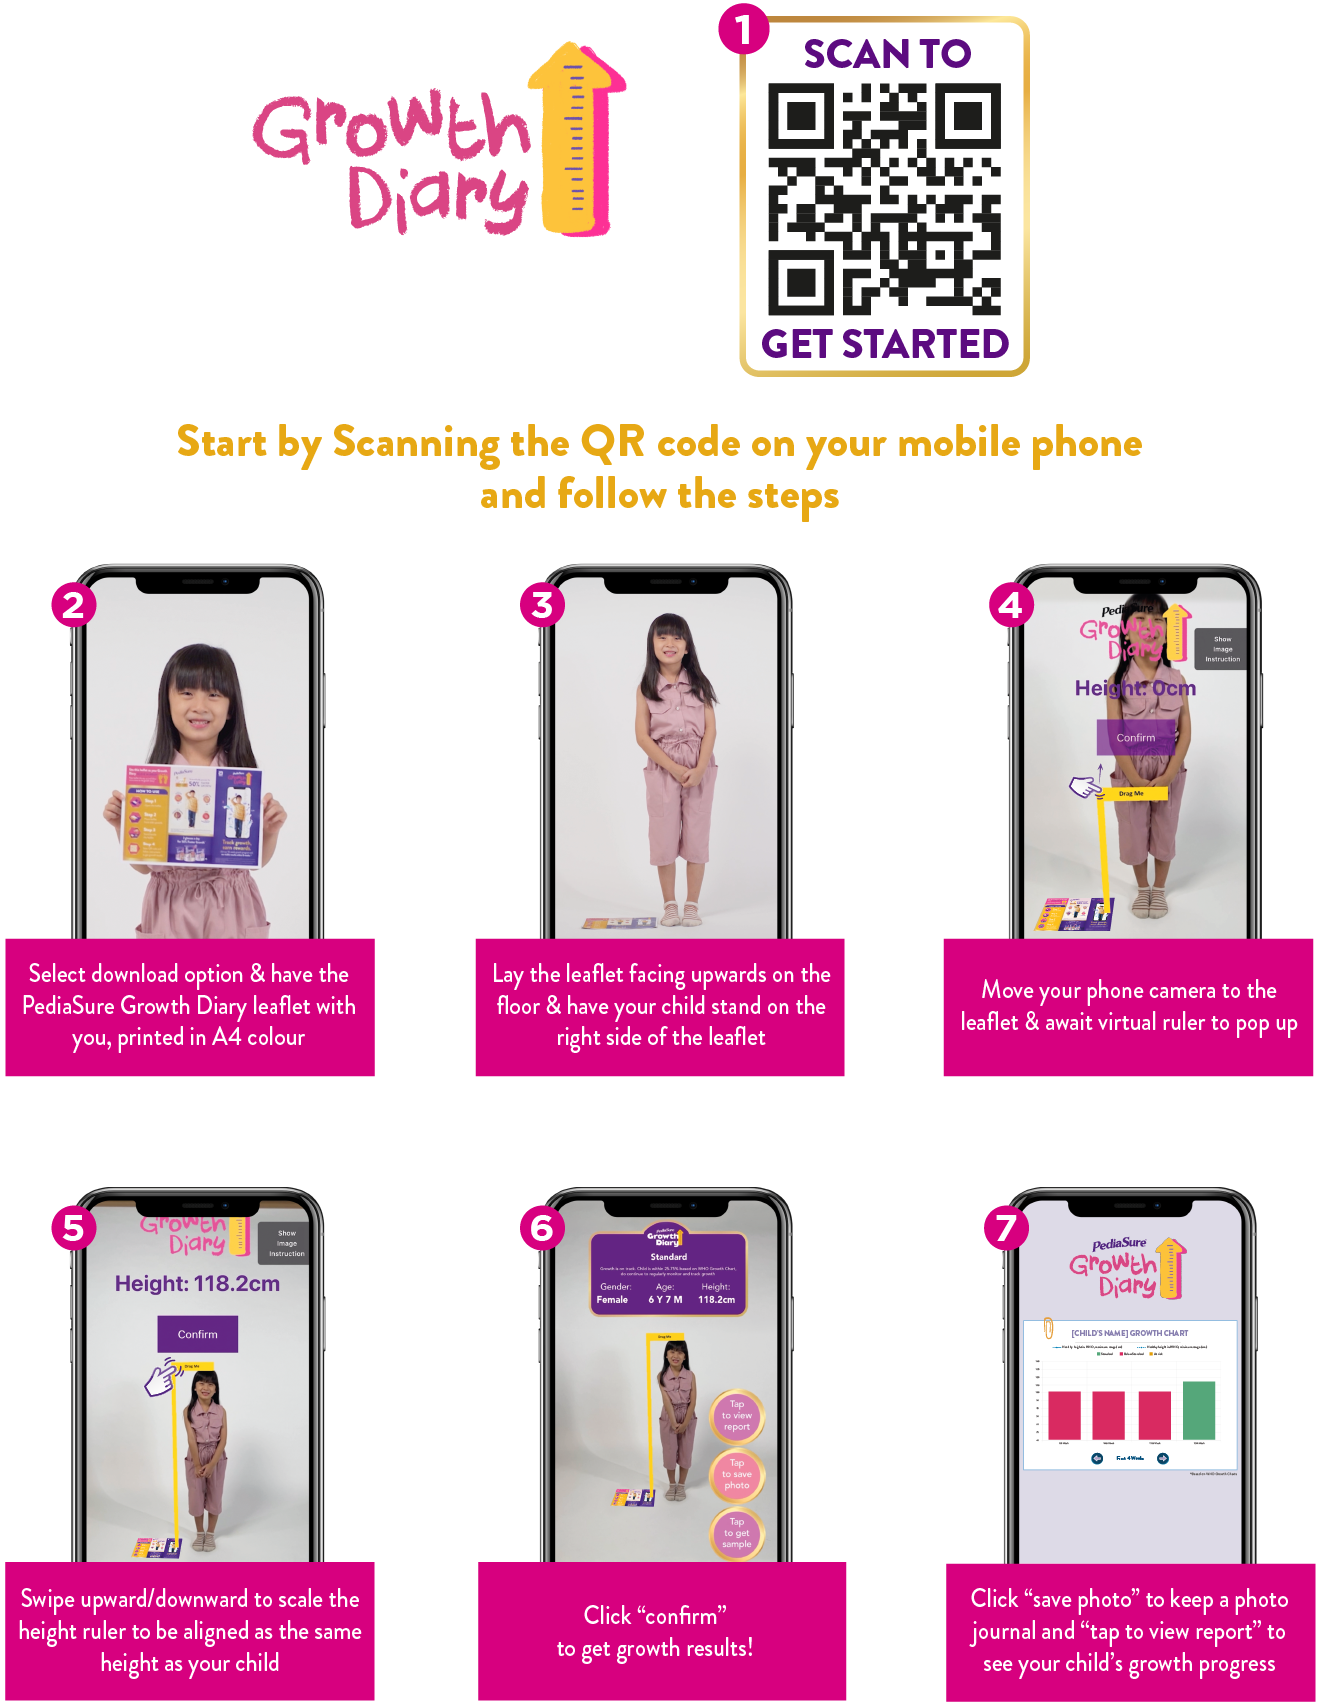 HOW TO USE. Start by Scanning the QR code on your mobile phone and follow the steps. 1. Scan To Get Started 2. Select download option & have the PediaSure Growth Diary leaflet with you, printed in A4 colour. 3. Lay the leaflet facing upwards on the floor & have your child stand on the right side of the leaflet. 4. Move your phone camera to the leaflet & await virtual ruler to pop up. 5. Swipe upward/downward to scale the height ruler to be aligned as the same height as your child. 6. Click 'confirm' to get growth results! 7. Click 'save photo' to keep a photo journal and 'tap to view report' to see your child's growth progress.